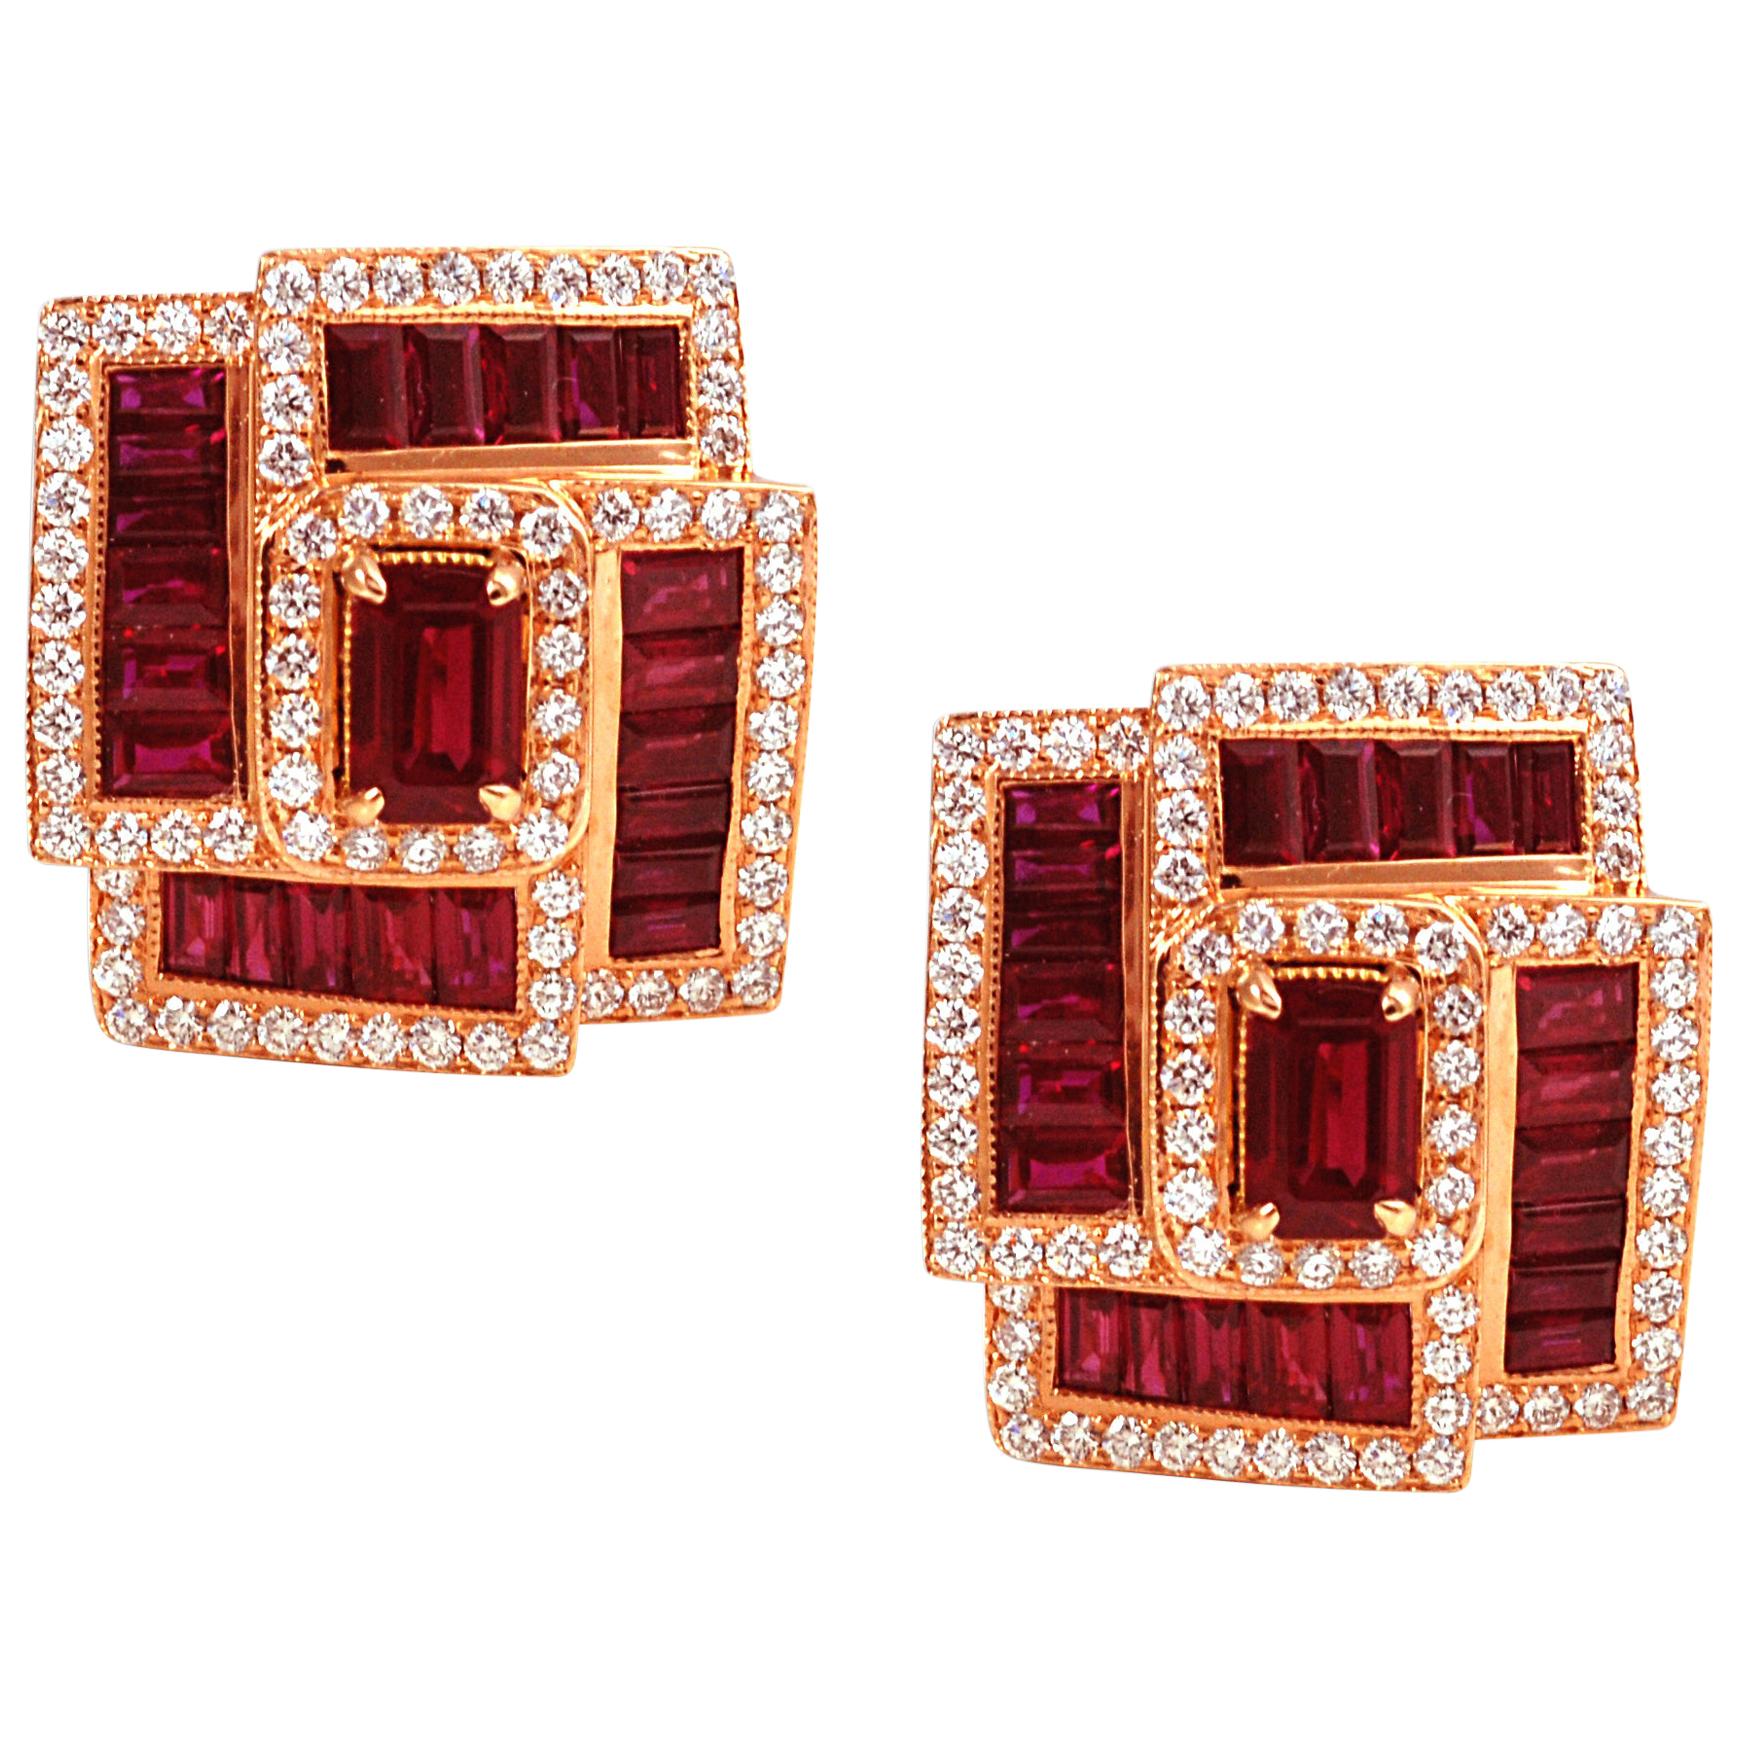 Ruby 3.75 Carat, Ruby 1.29 Carat with Diamond 1.03cts Earrings in 18 Karat Gold